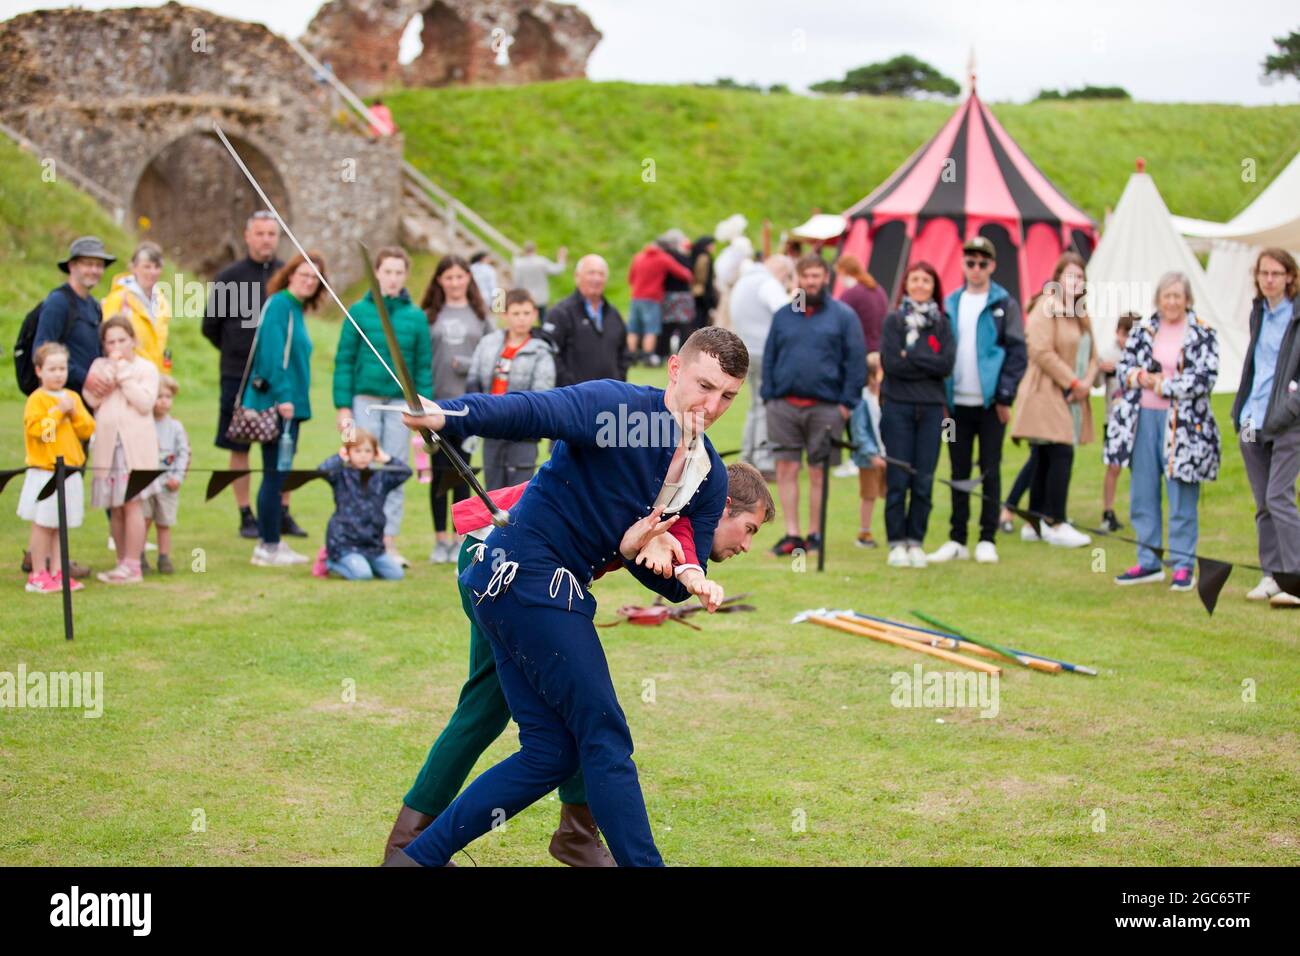 1st August 2021. Norfolk, England. Soldiers Through the Ages event at Castle Rising, the first public event at the 12th Century castle since before the Covid pandemic outbreak. Members of The Exiles medieval martial arts group demonstrating their sword skills and broad knowledge of armed and unarmed self-defence to visitors. Stock Photo